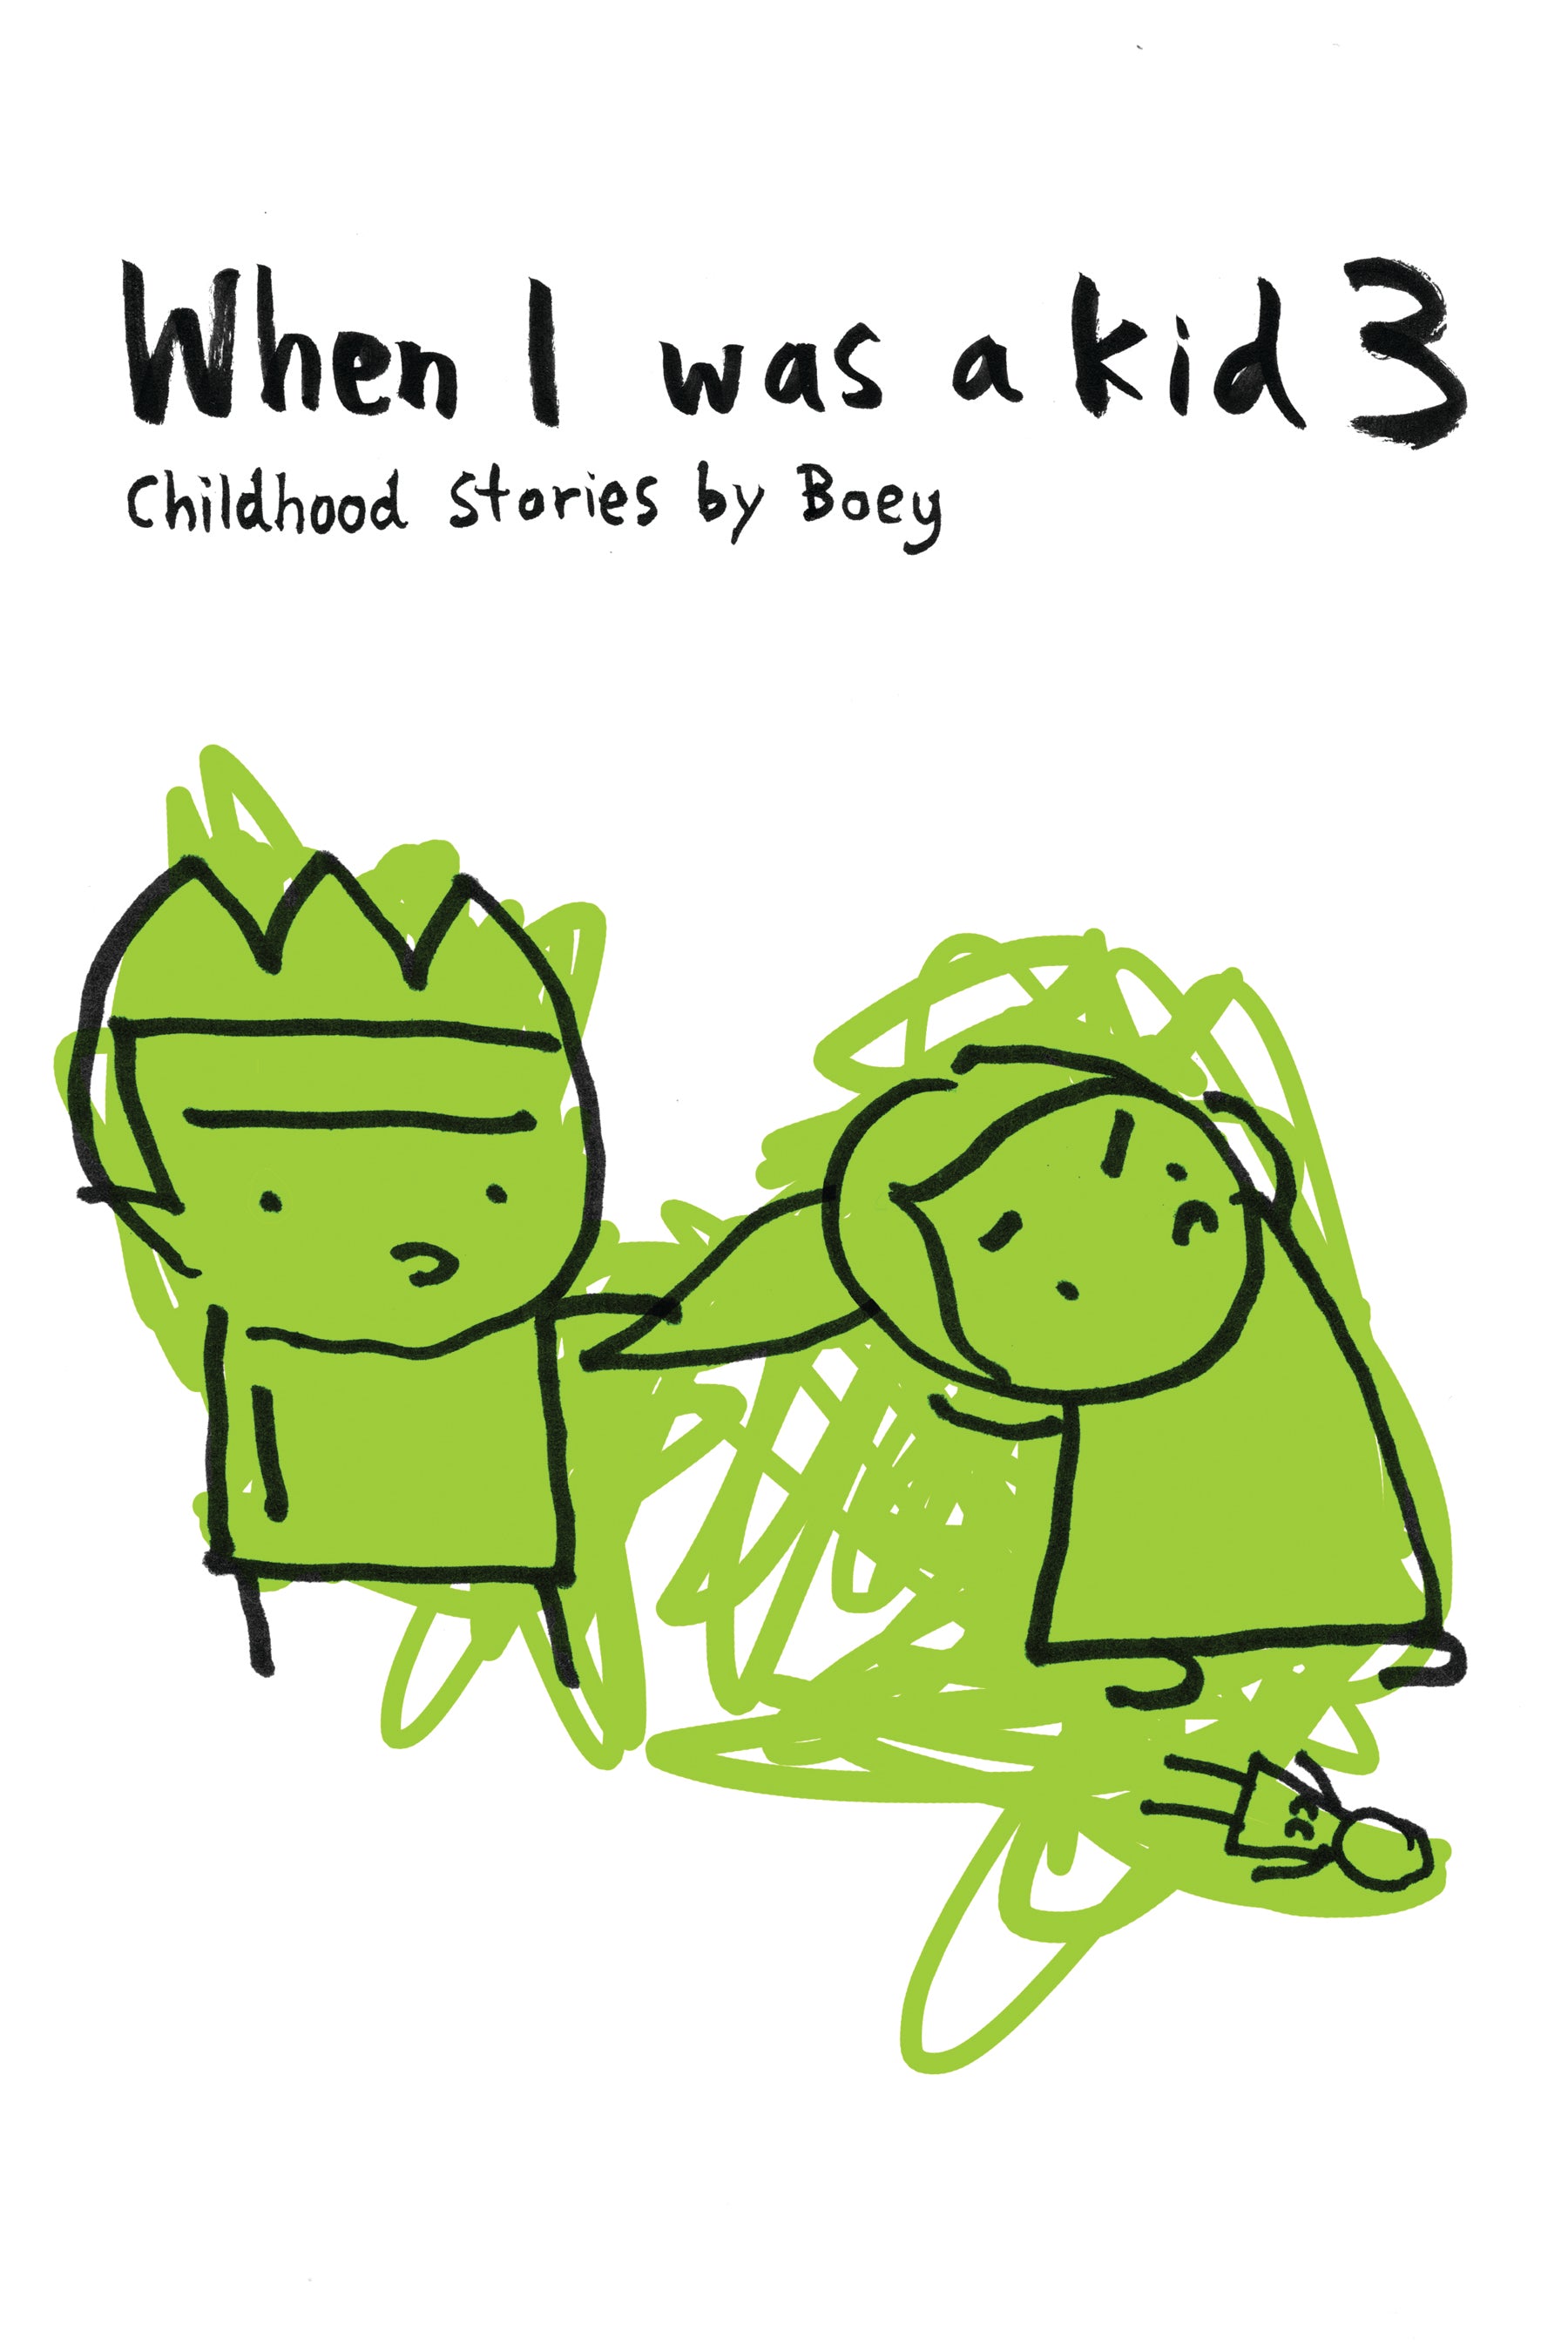 When I was a Kid 3: Childhood Stories by Boey